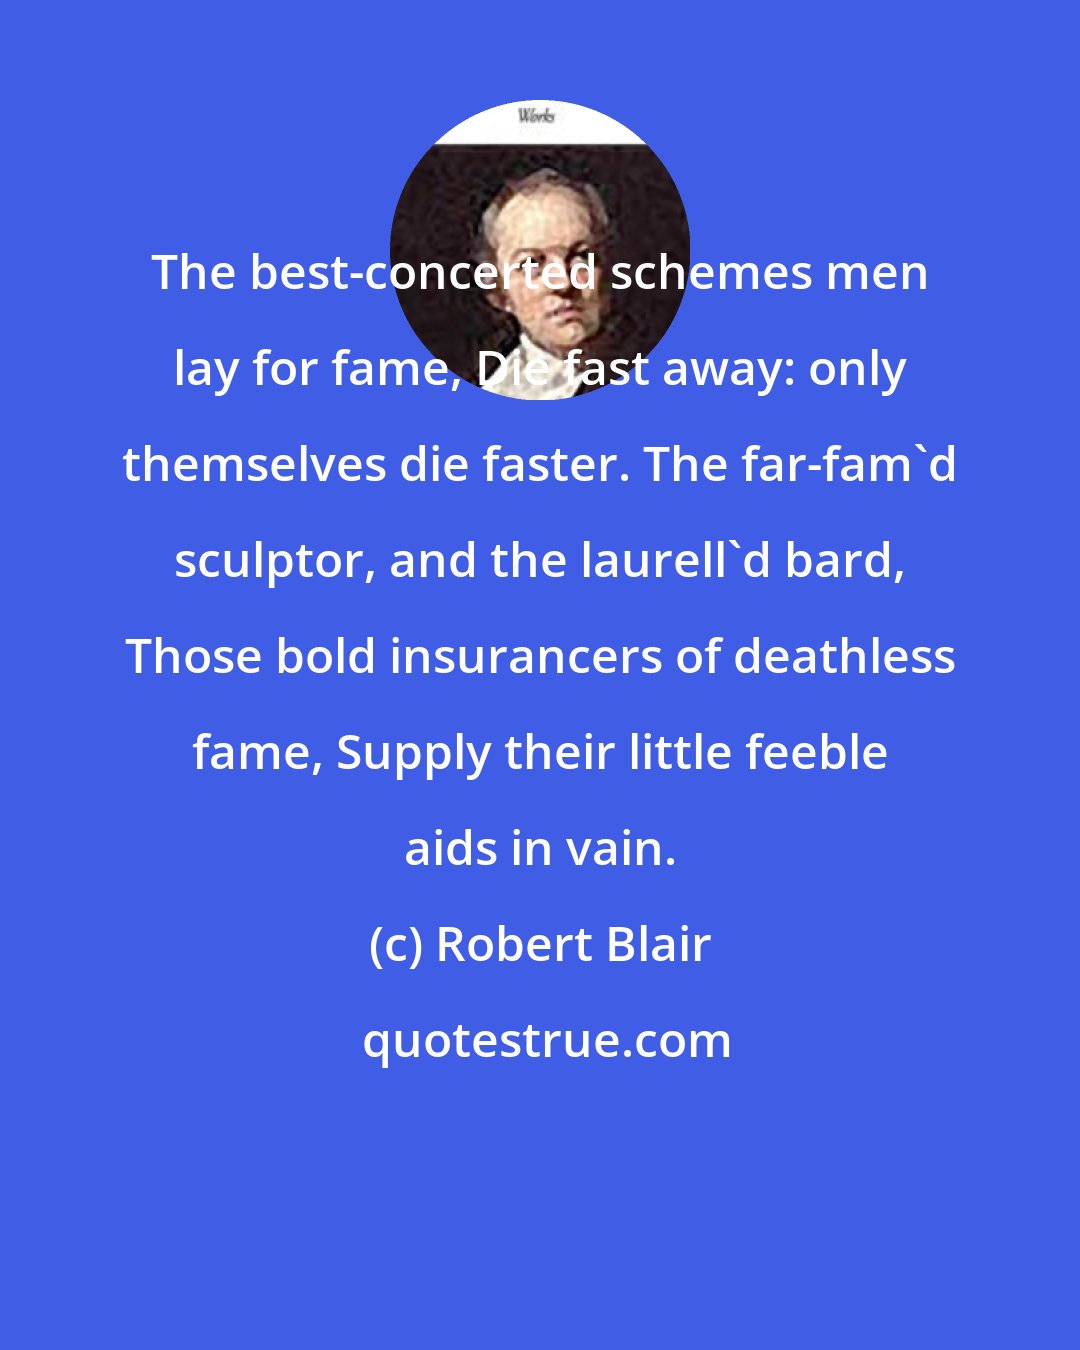 Robert Blair: The best-concerted schemes men lay for fame, Die fast away: only themselves die faster. The far-fam'd sculptor, and the laurell'd bard, Those bold insurancers of deathless fame, Supply their little feeble aids in vain.